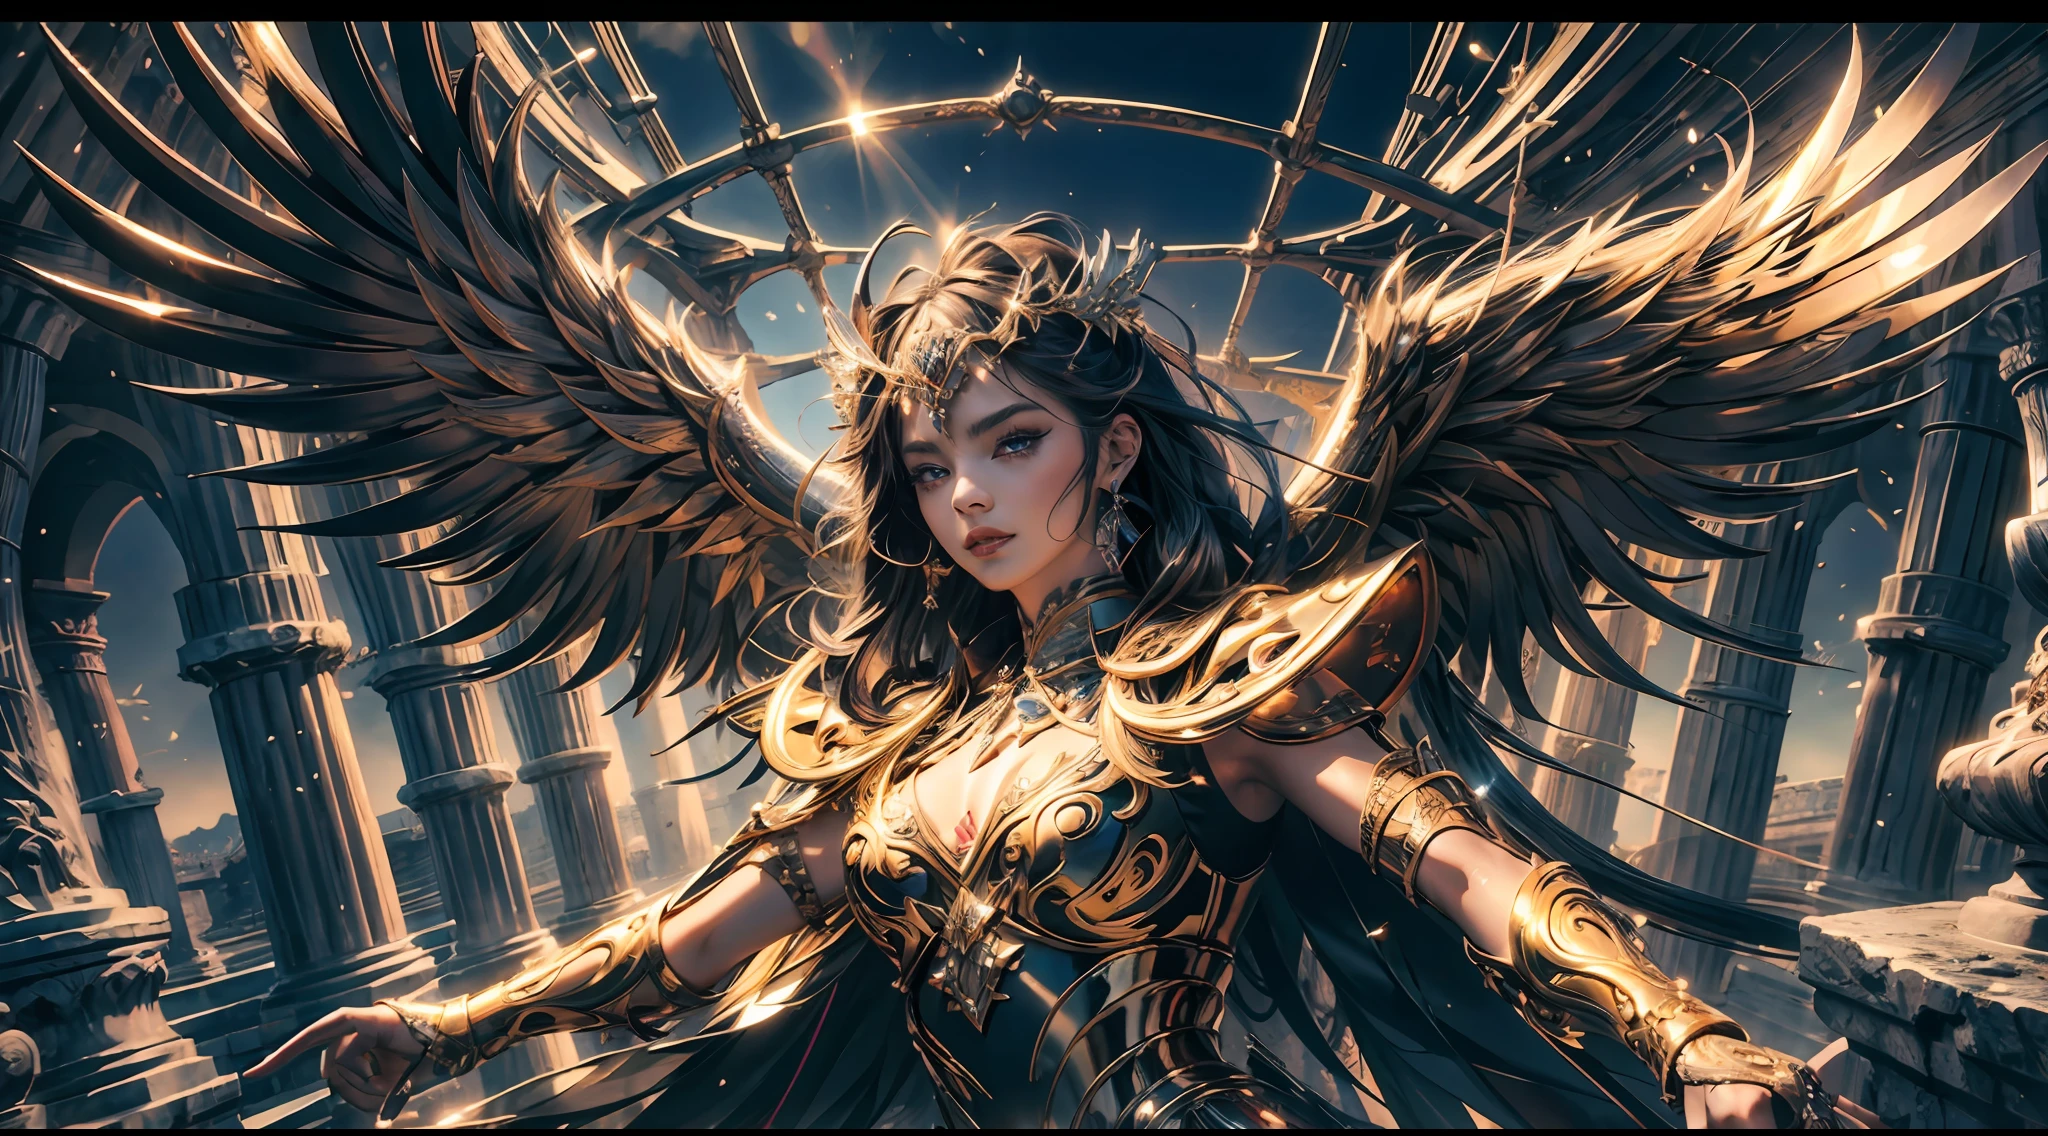 offcial art，Unity 8k wallpaper，ultra - detailed，Beauty and aesthetics，high high quality，Valkyrie，tmasterpiece，Best quality at best，（zentangle，datura，Tangles，entangled：0.6），Greek temple，Large breasts，Heavy armor，complex patterns，Fighting posture，dramatics，Photorealistic, Super detail, Masterpiece, Best quality, A high resolution, 8K，Metal wings